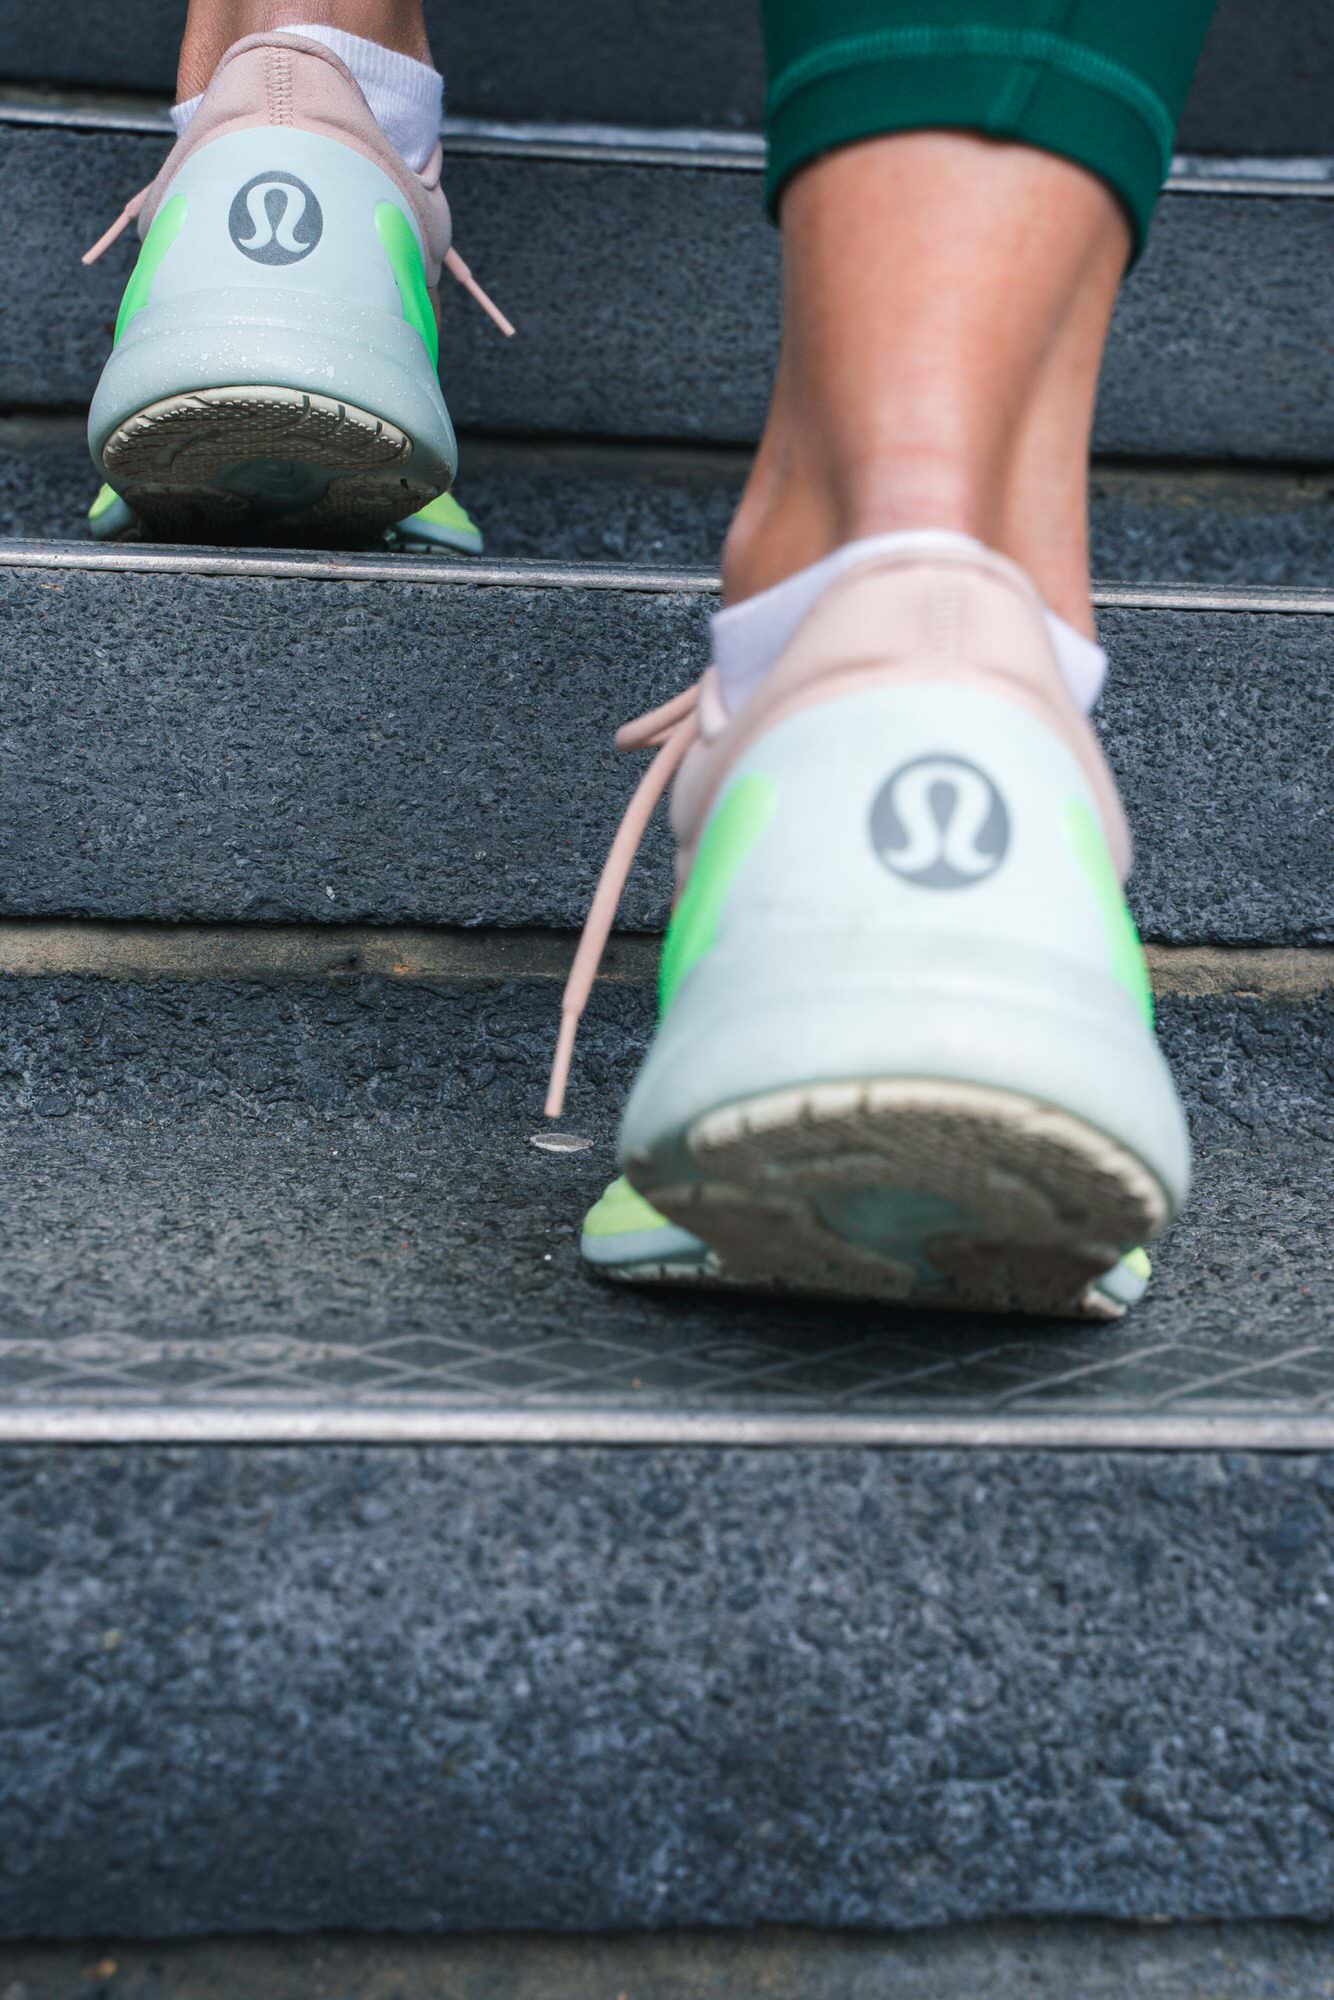 Lululemon Launches Men's Footwear For Running And Active Lifestyles